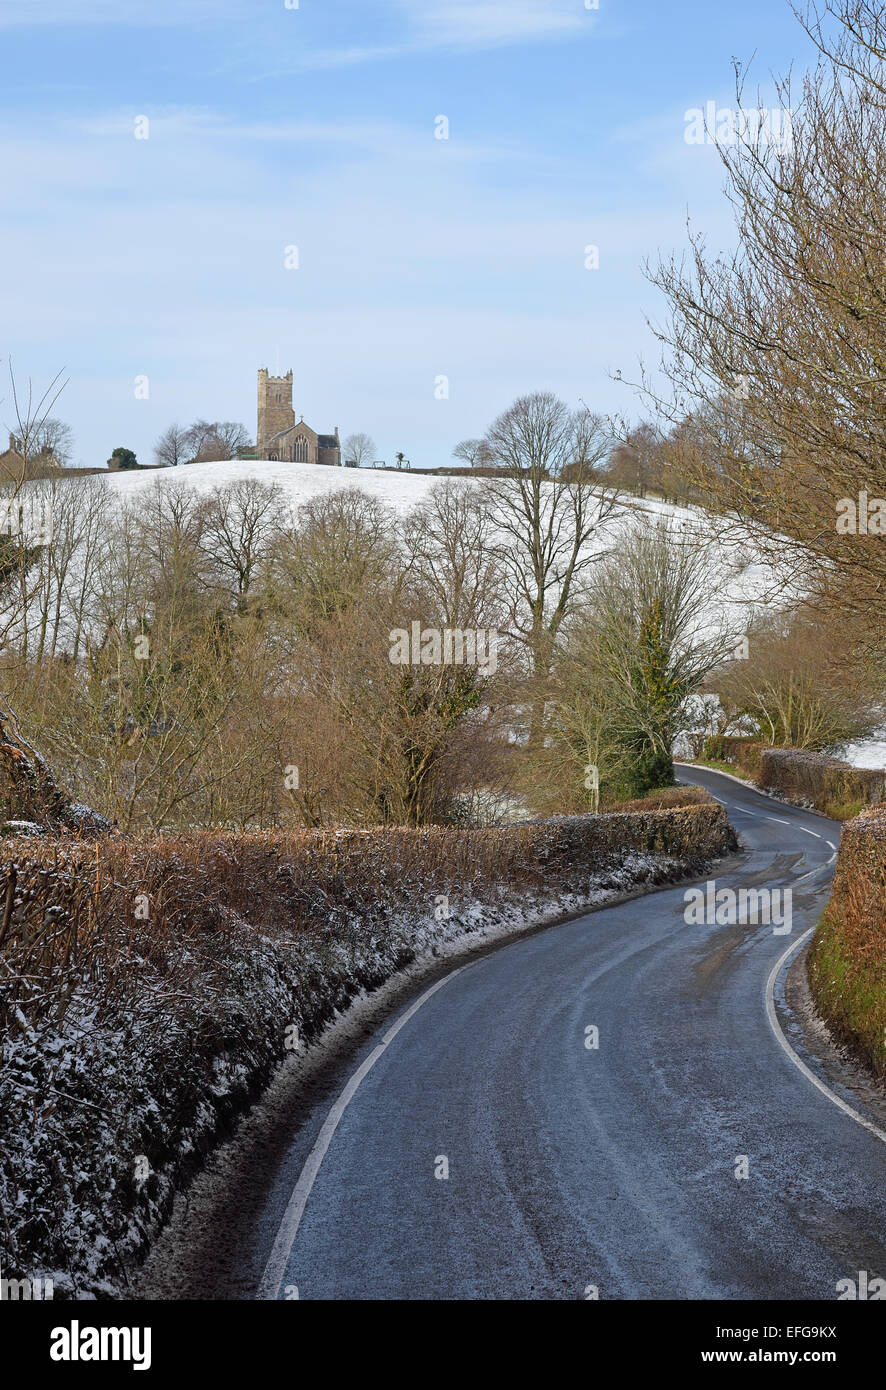 Road approaching Moretonhampstead, Dartmoor National Park in winter. The parish church of St Andrew can be seen on the hill. Stock Photo